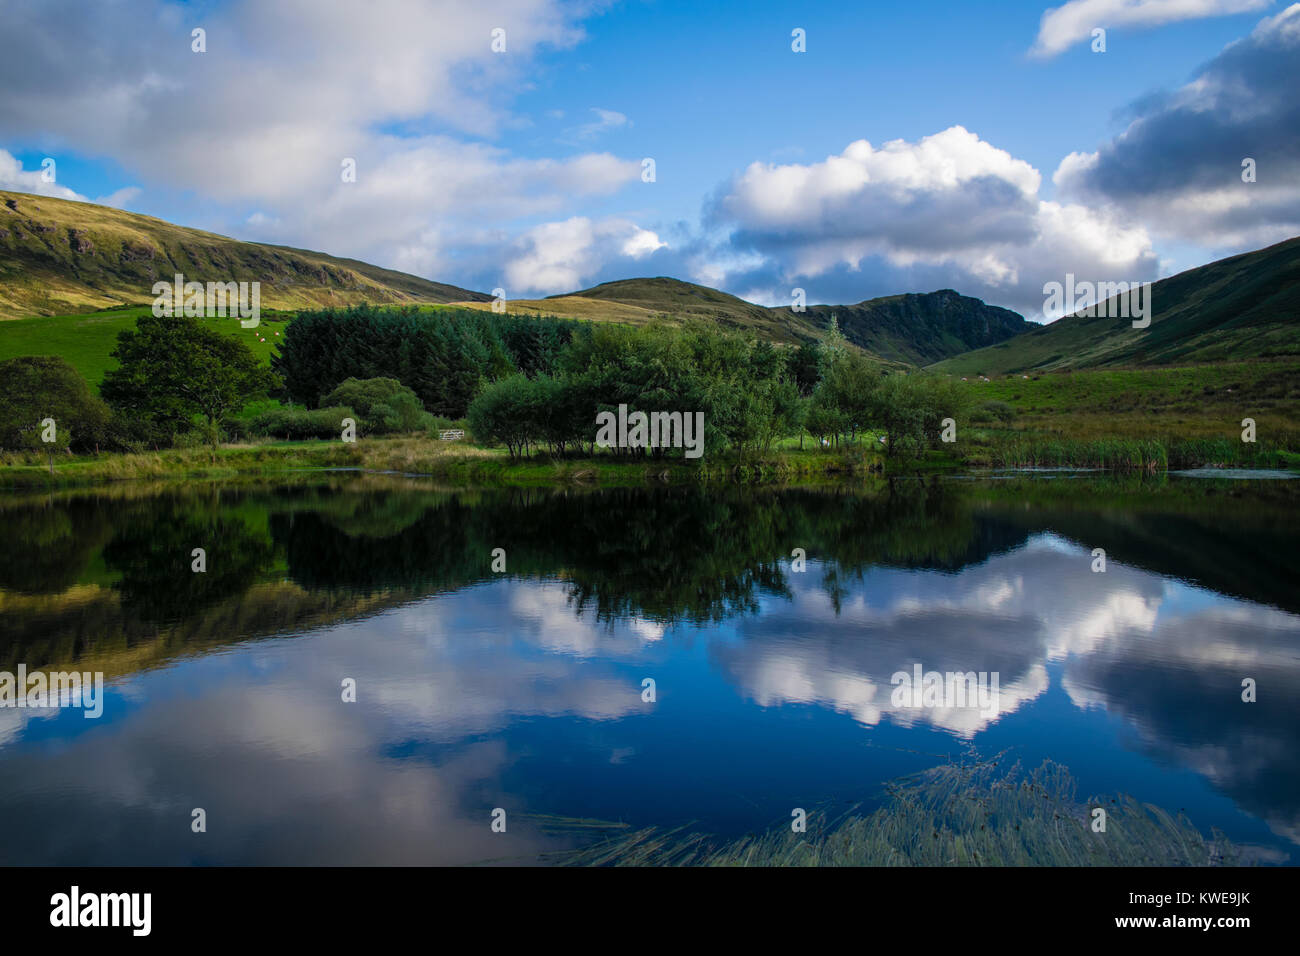 North Wales Landscape/Mountainscape Stock Photo